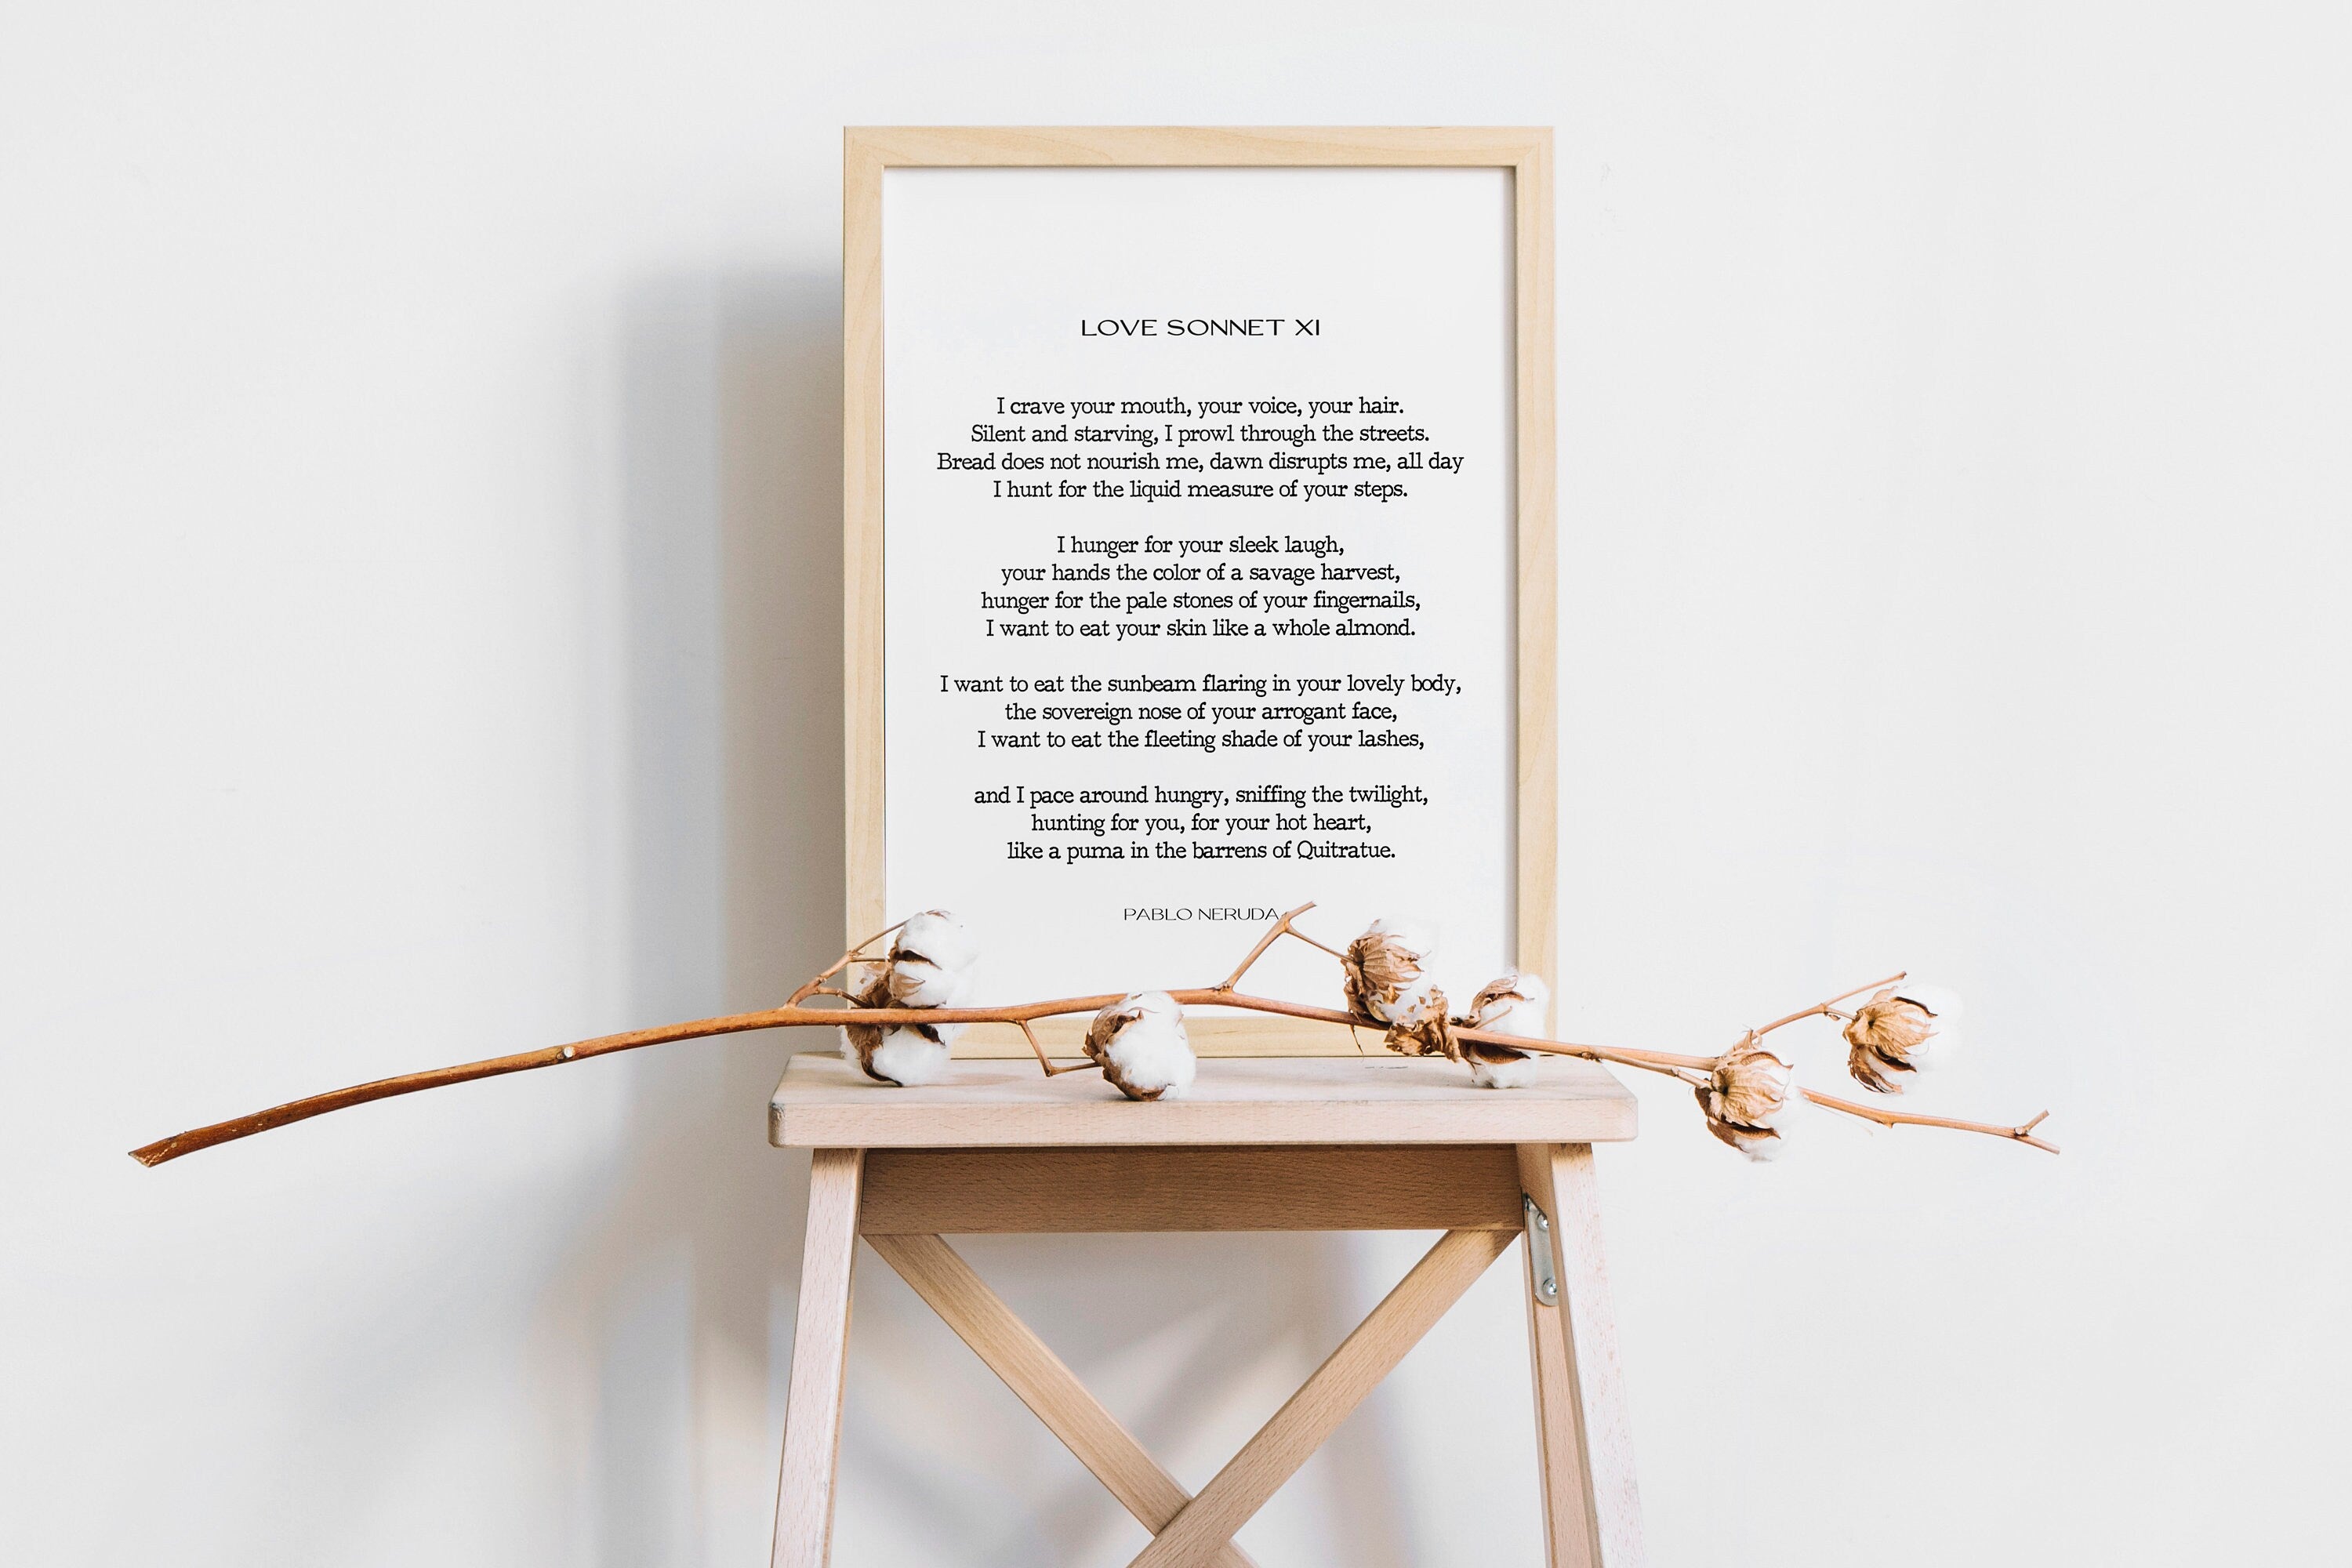 Pablo Neruda Love Sonnet XI Poem Print in Black & White for Wall Art Decor I crave your mouth your voice your hair, Anniversary Wedding Gift